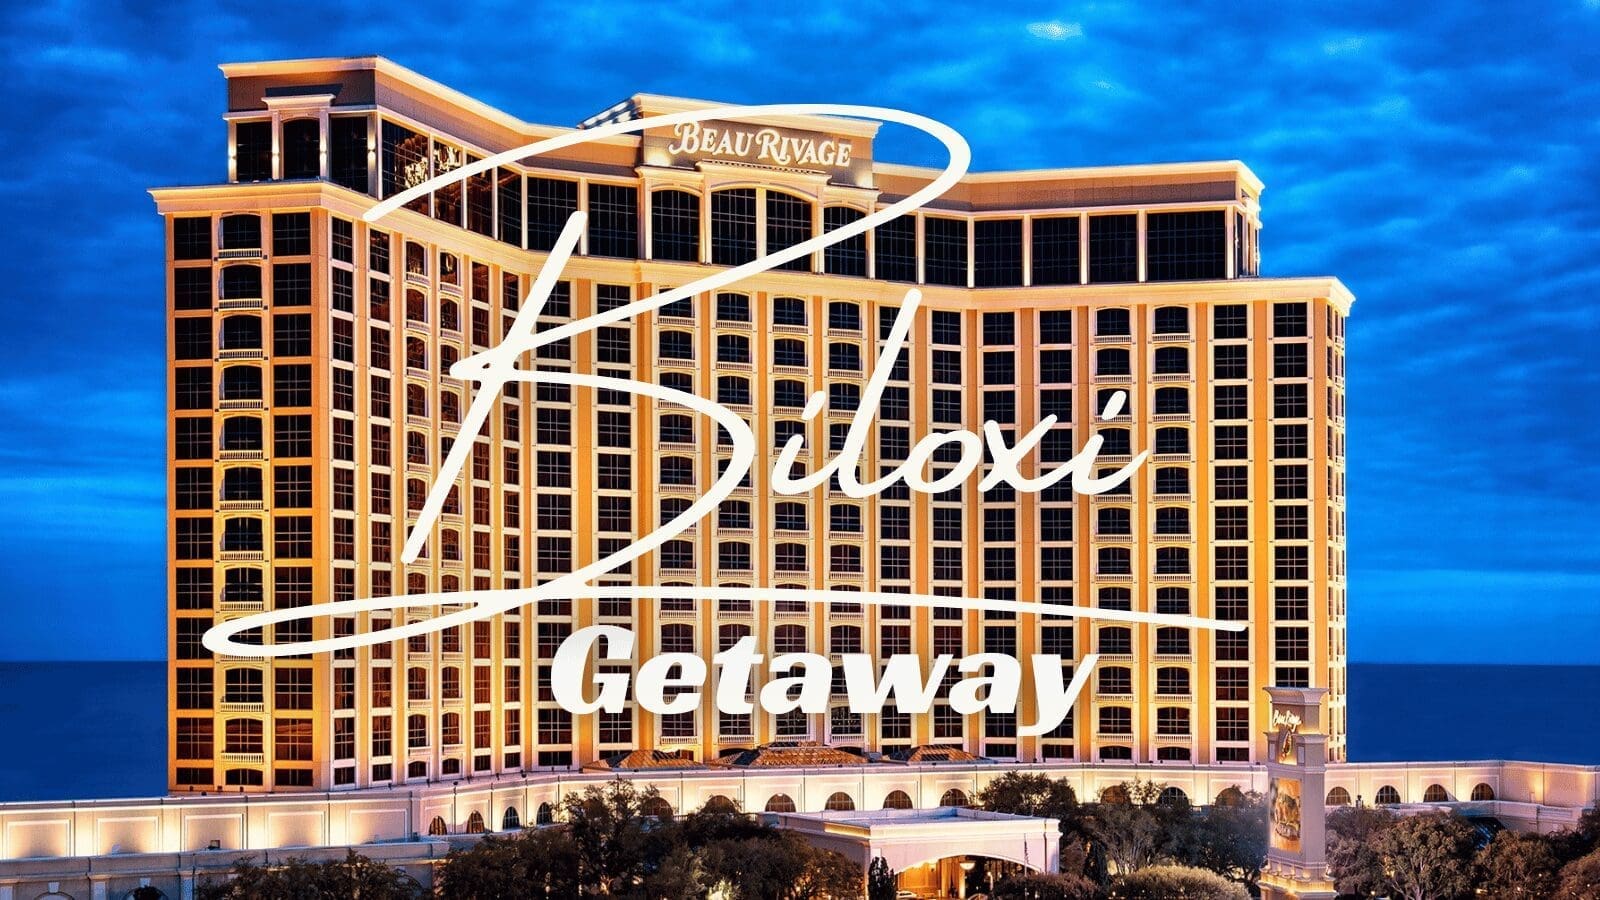 5 Reasons Why The Beau Rivage Resort & Casino is The Ultimate Biloxi Getaway